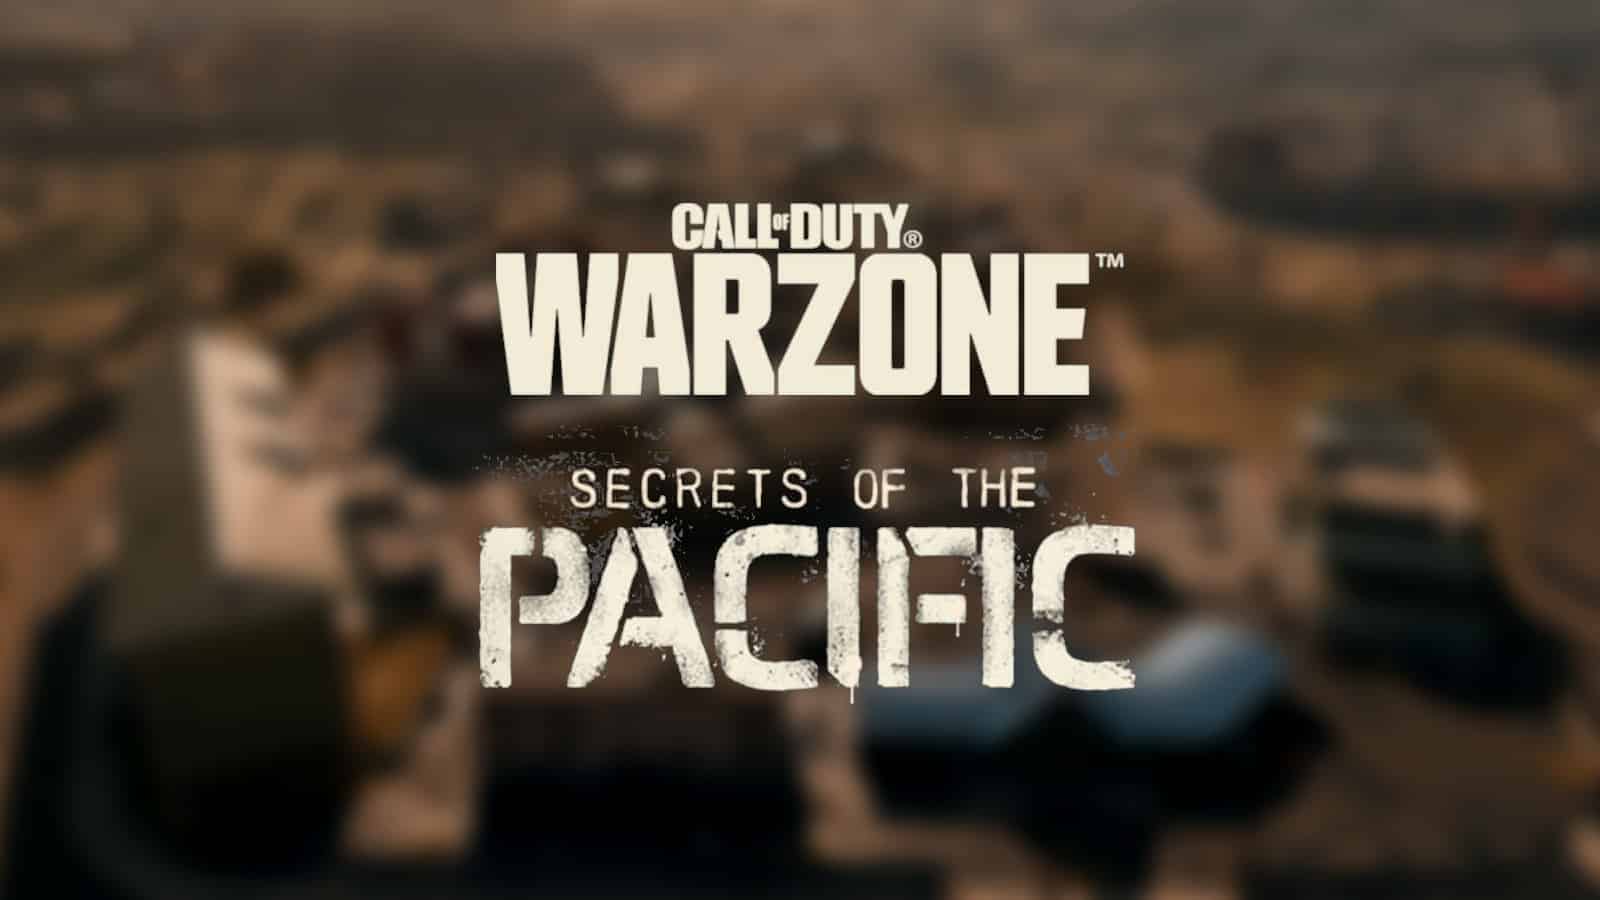 Warzone Secrets of the Pacific event logo